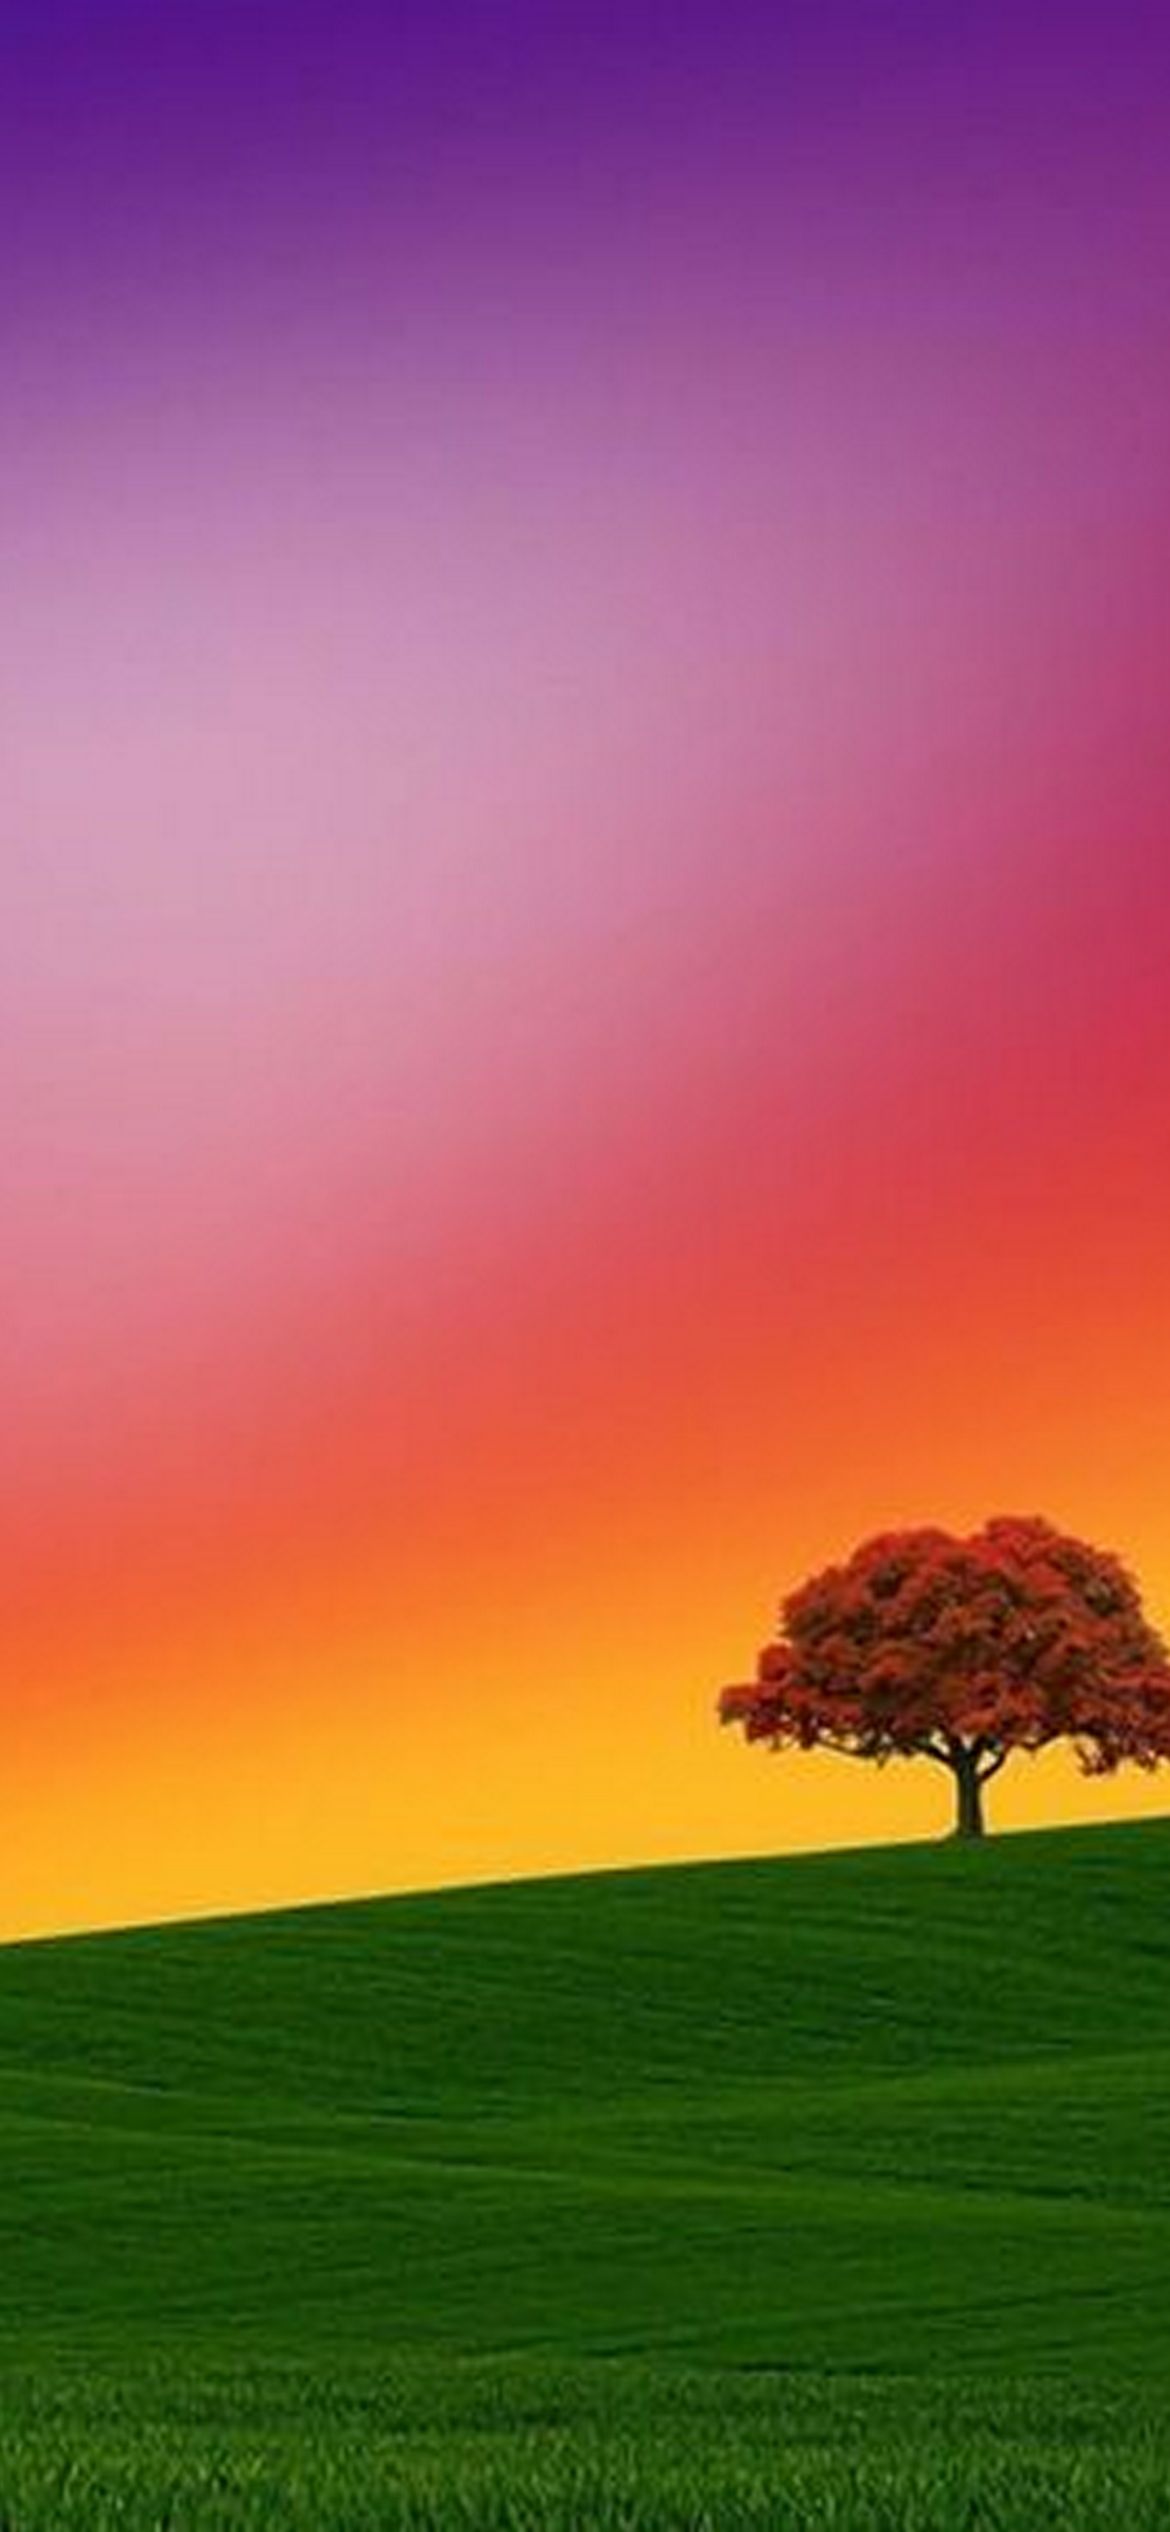 Colourful Nature HD wallpapers free download  Wallpaperbetter